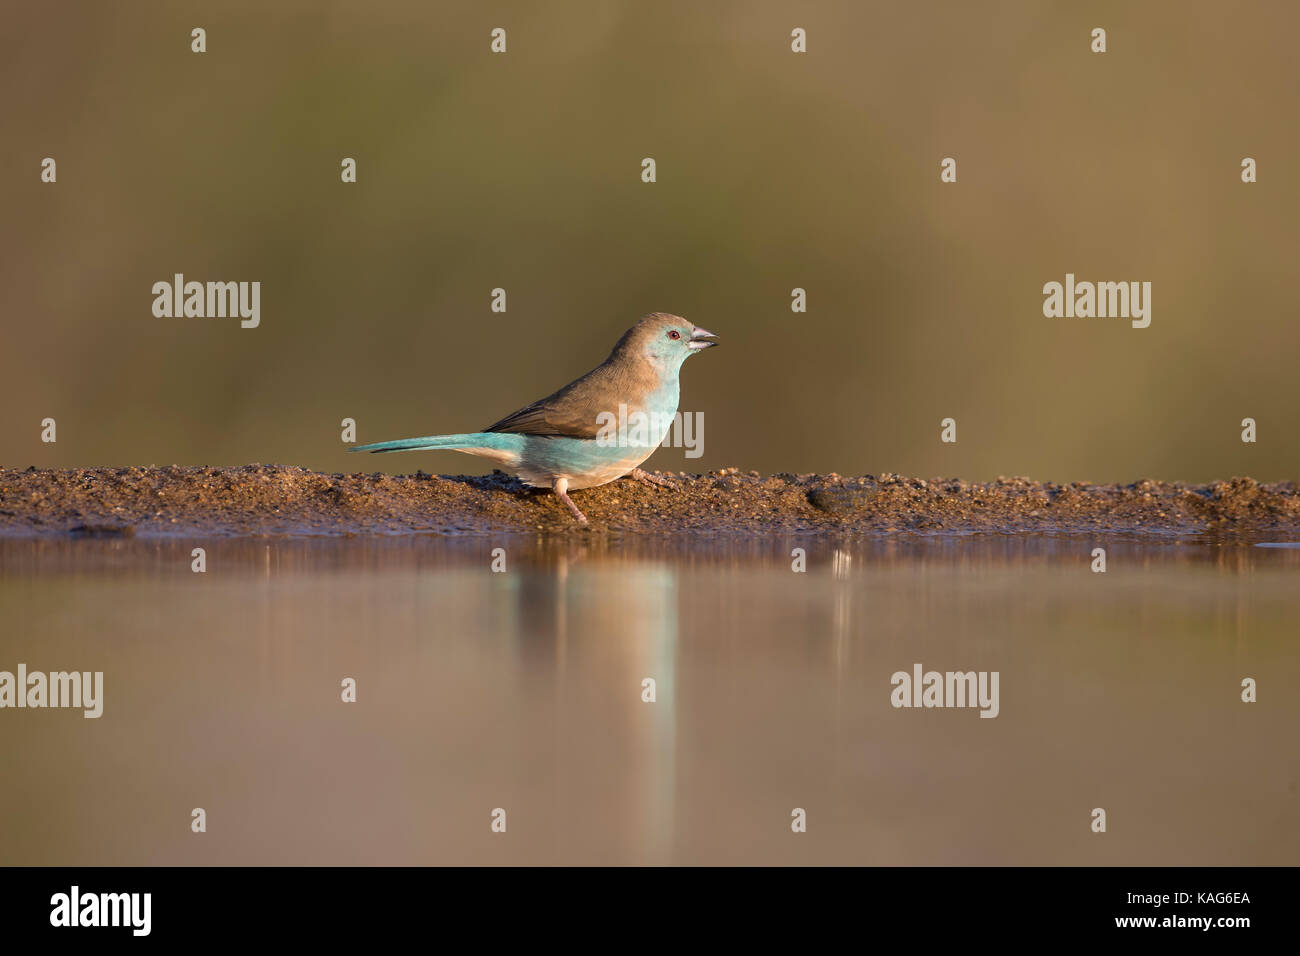 Blue Waxbill Uraeginthus angolensis in profile on the bank of a calm water pool Stock Photo